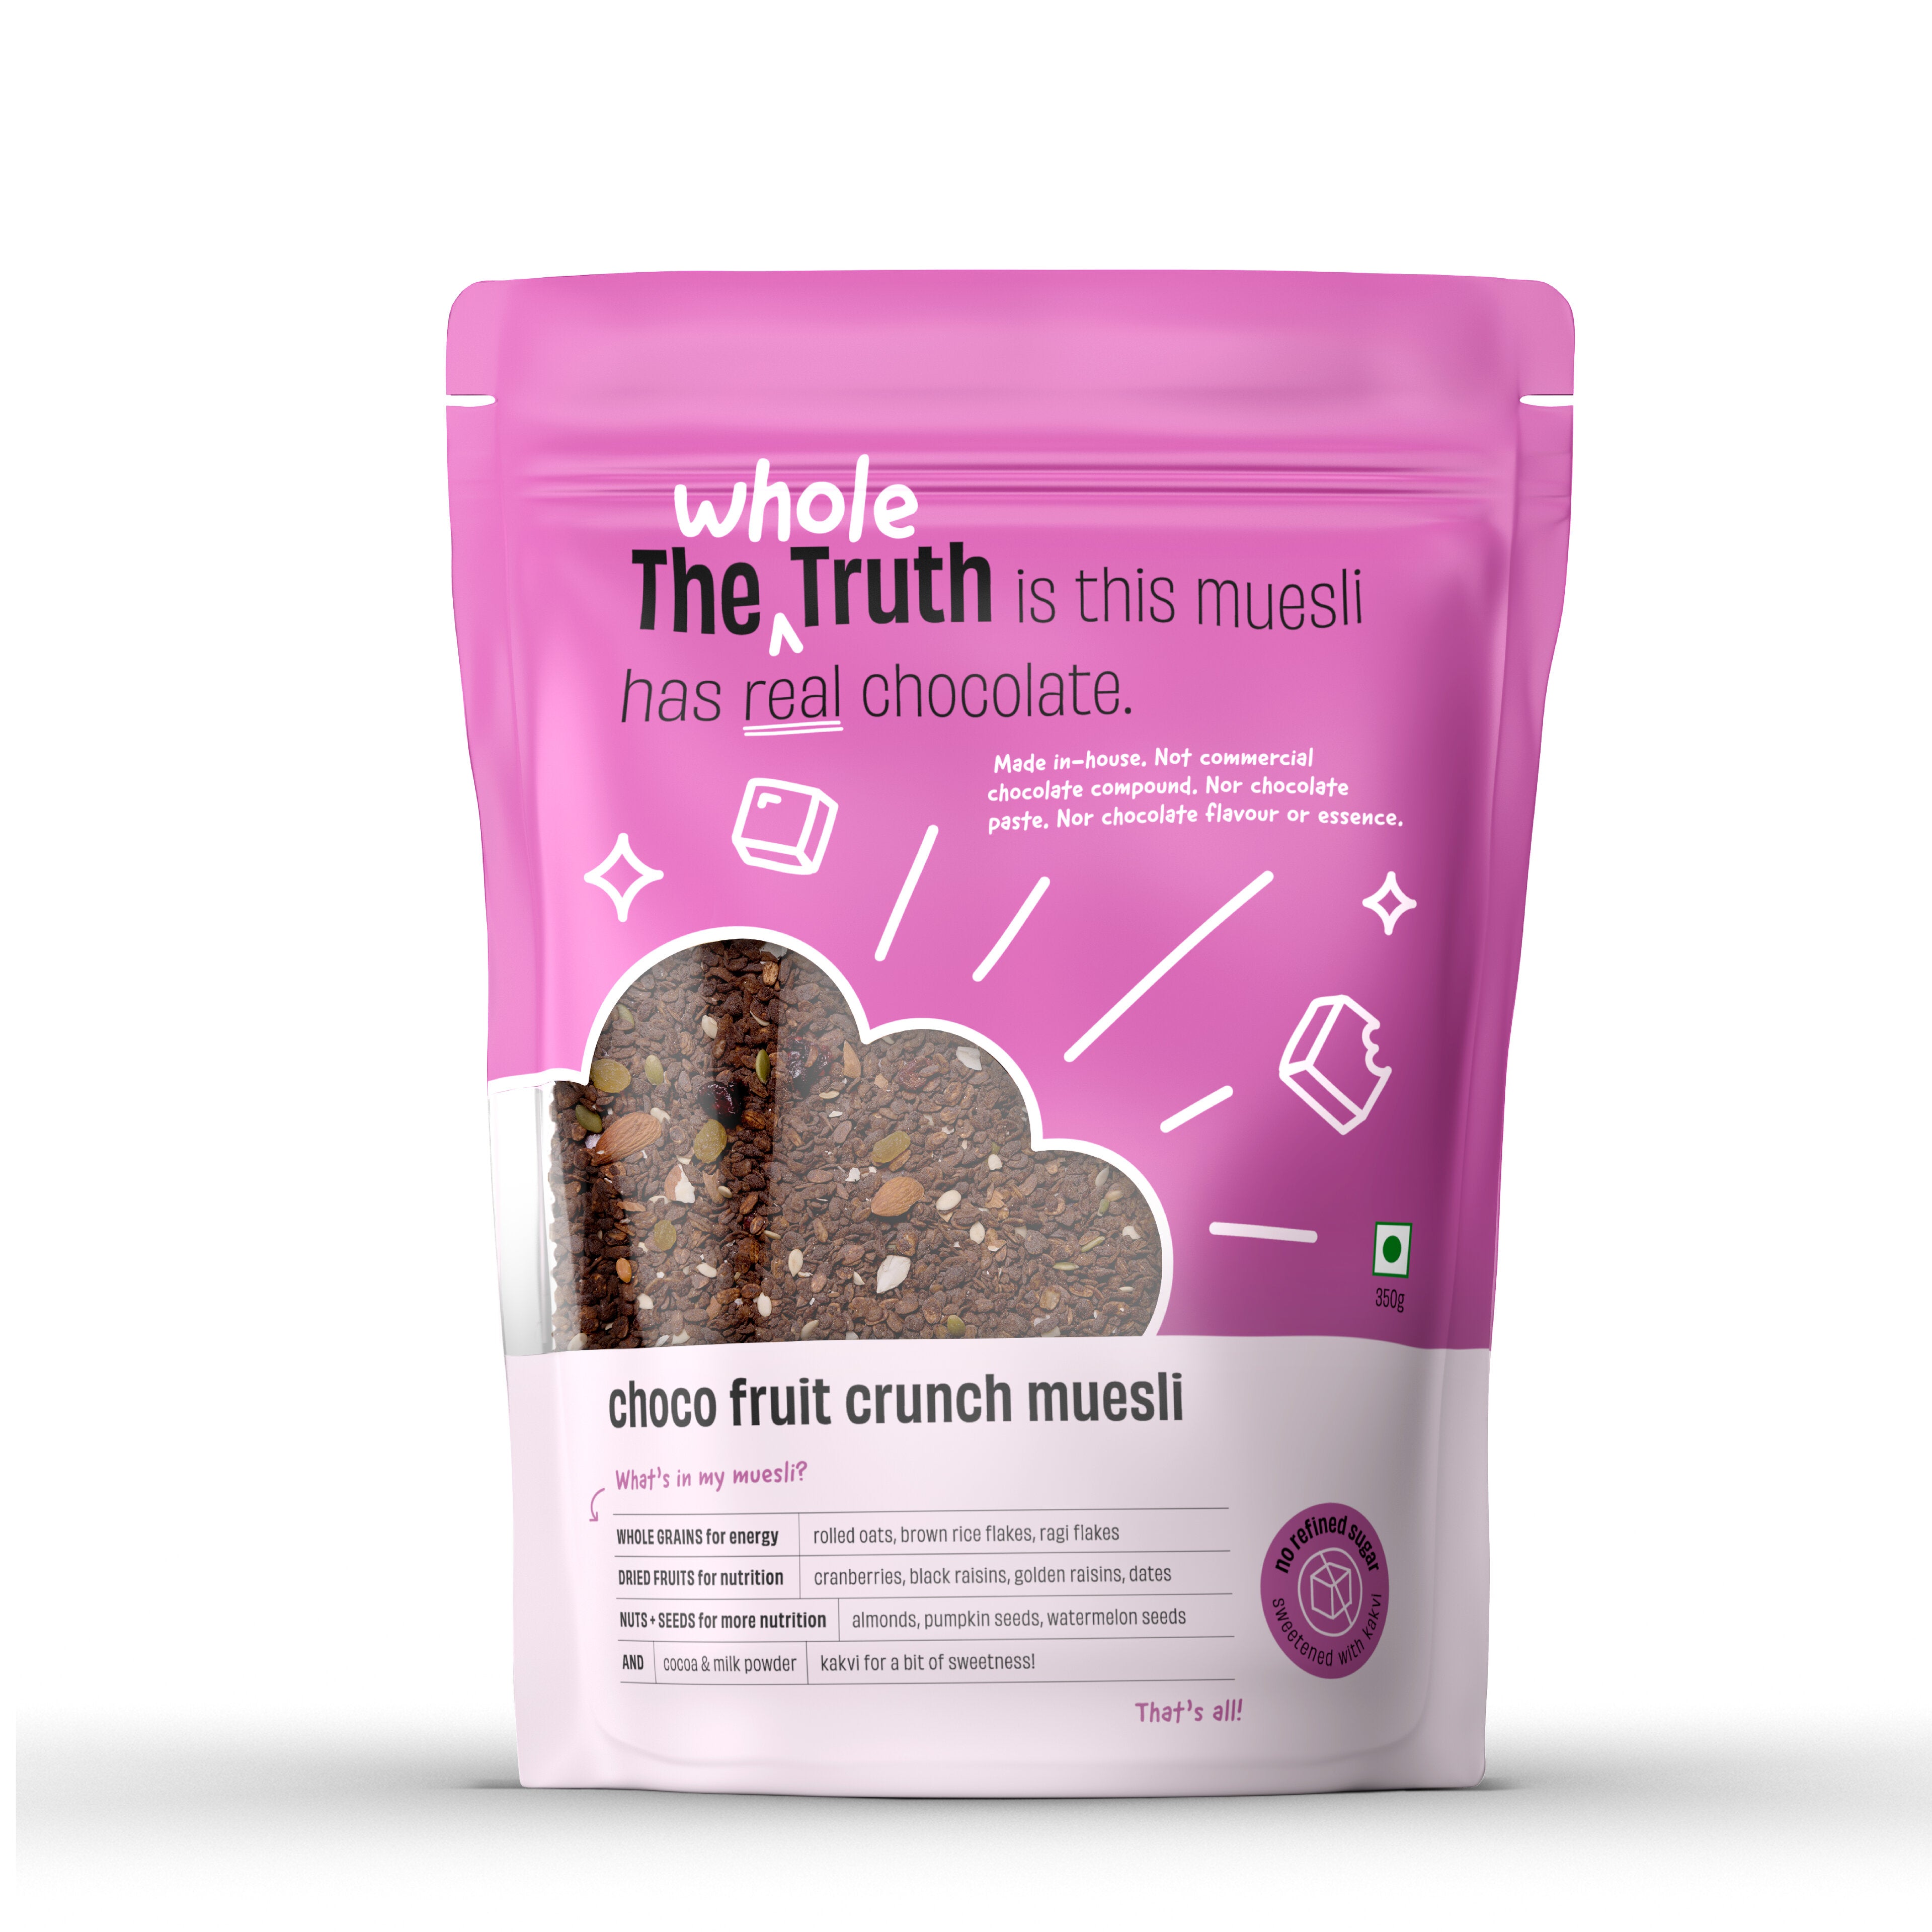 The Whole Truth - Breakfast Muesli - Choco Fruit Crunch - Made with REAL Chocolate - No added flavour, No artificial colour, No preservatives